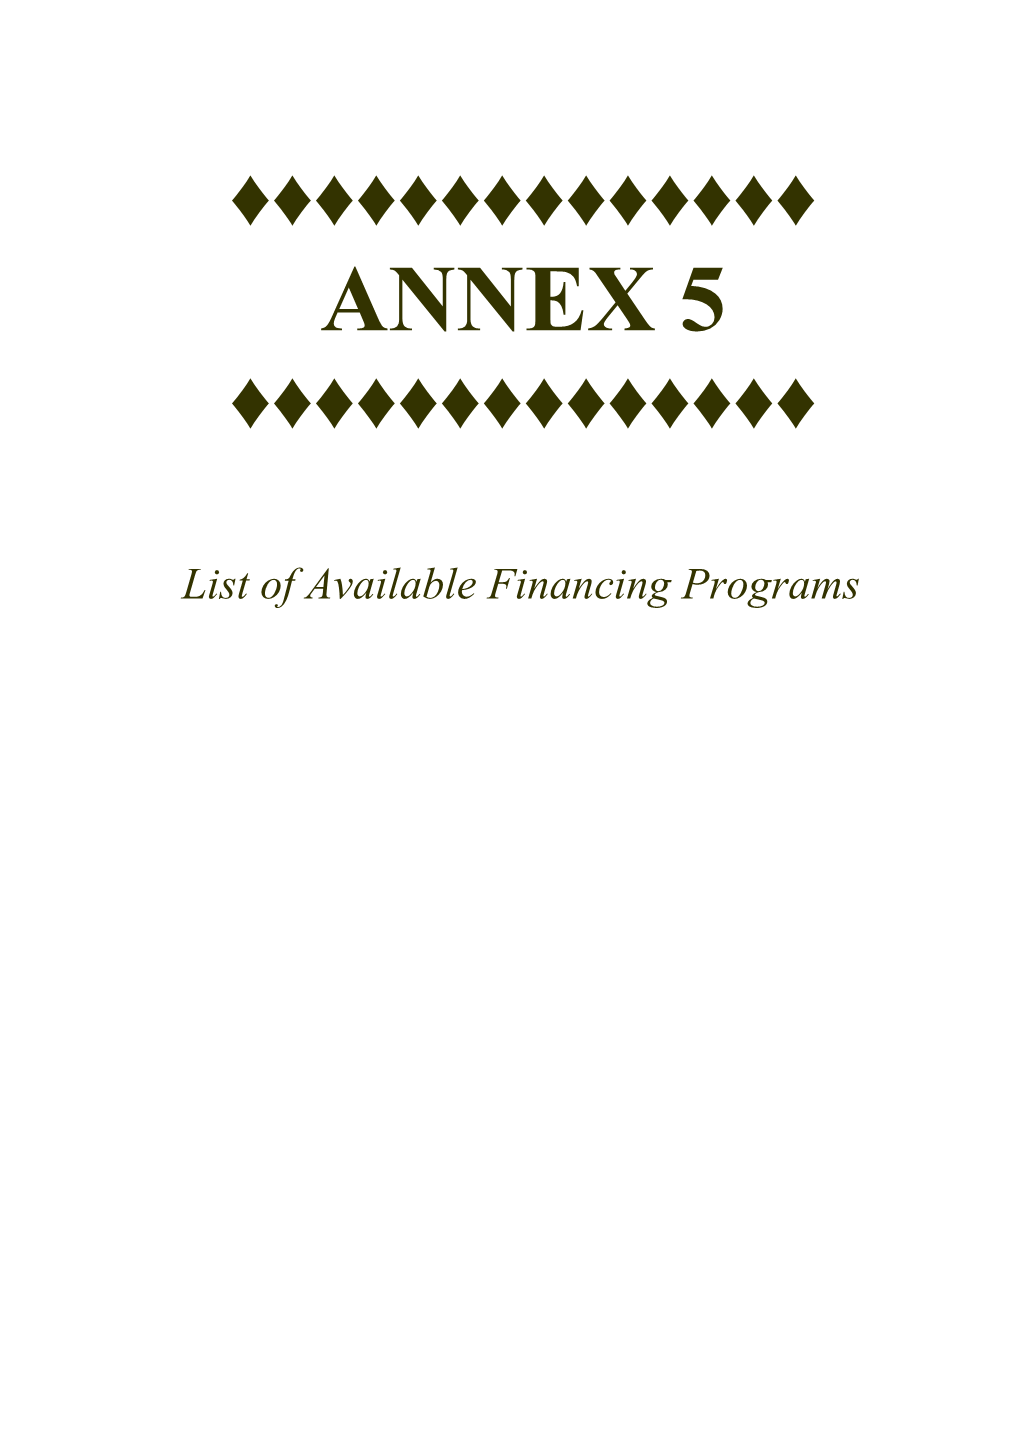 List of Available Financing Programs